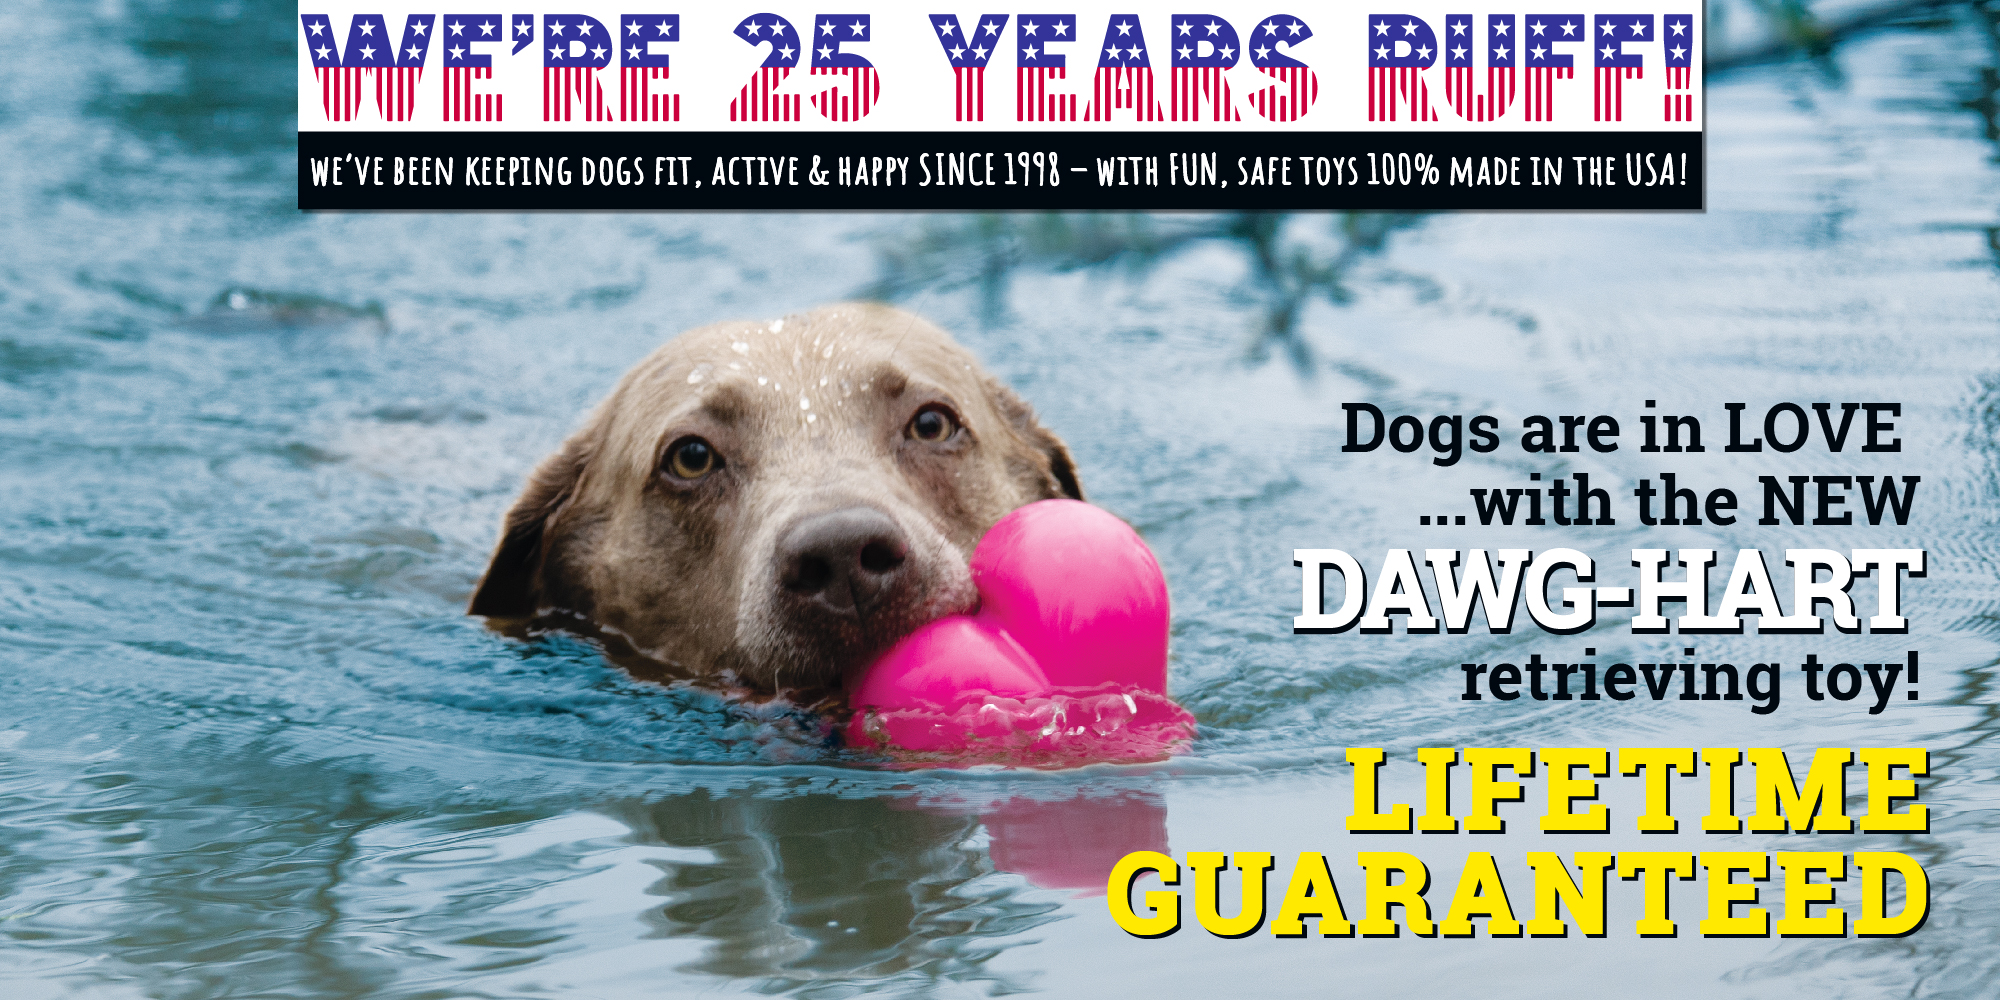 A cute labrador swimming in blue water holding Ruff Dawg's Dawg-Hart - a heart shaped toy - in her mouth. Dogs are in love with new Dawg-Hart Lifetime Guaranteed retrieving toy!